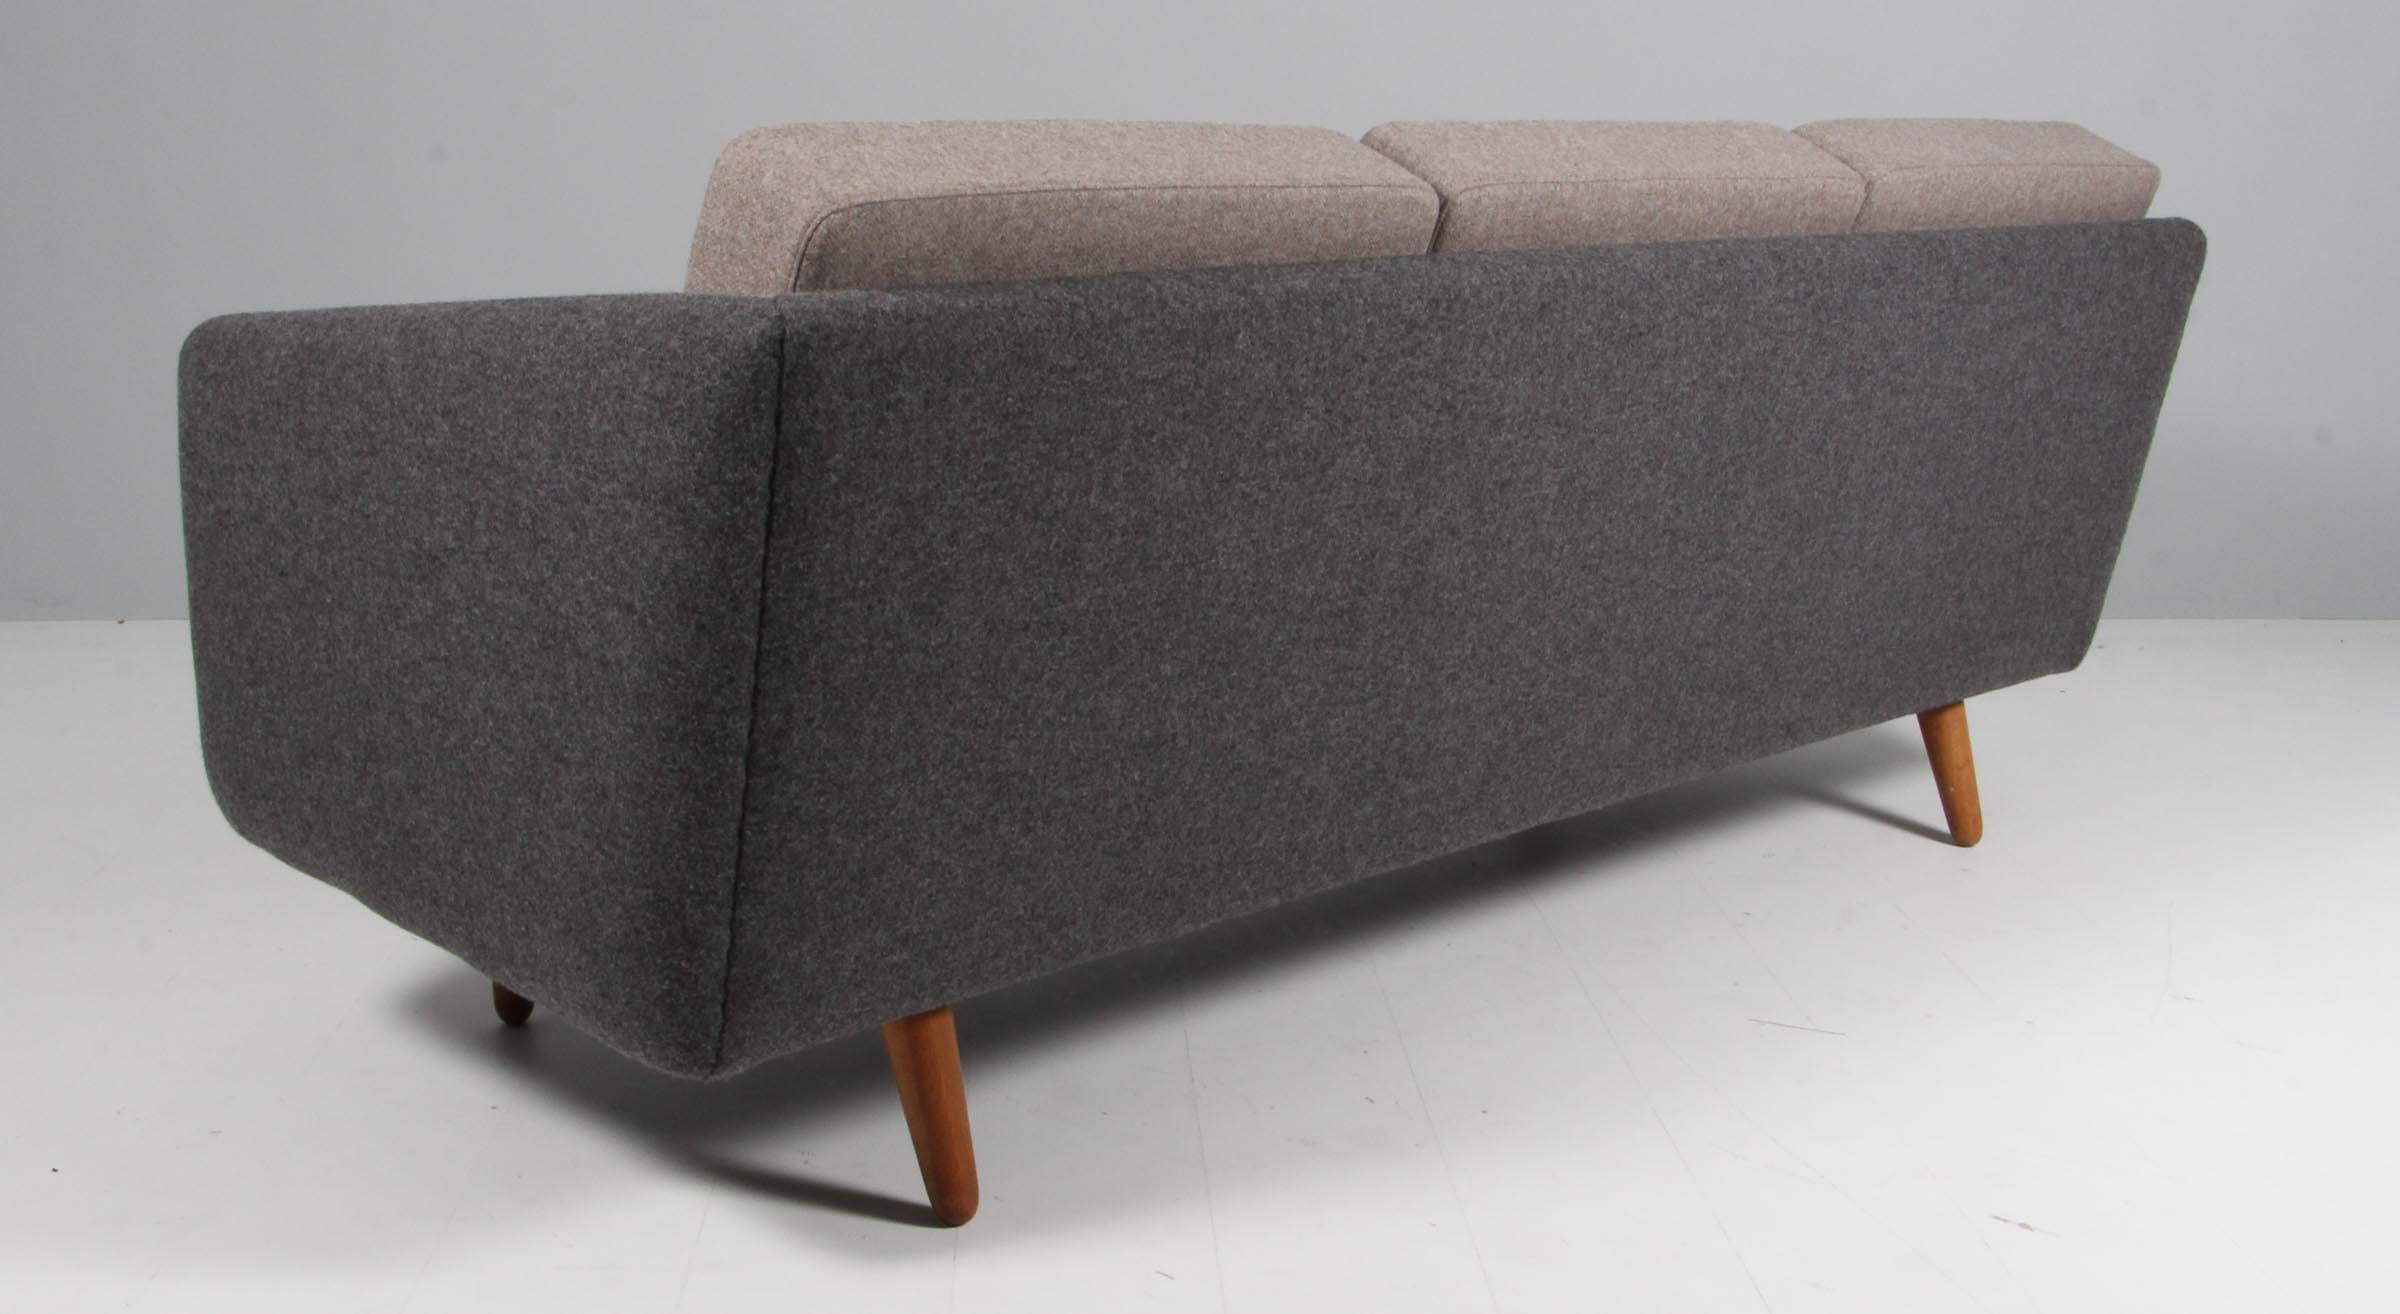 Børge Mogensen three-seat sofa, new upholstered with light and dark grey 100 % New Zealand wool.

Legs of oak.

Model 201, made by Fredericia Furniture.

This is the old model 201 which was the first sofa that Børge Mogensen designed. The model have